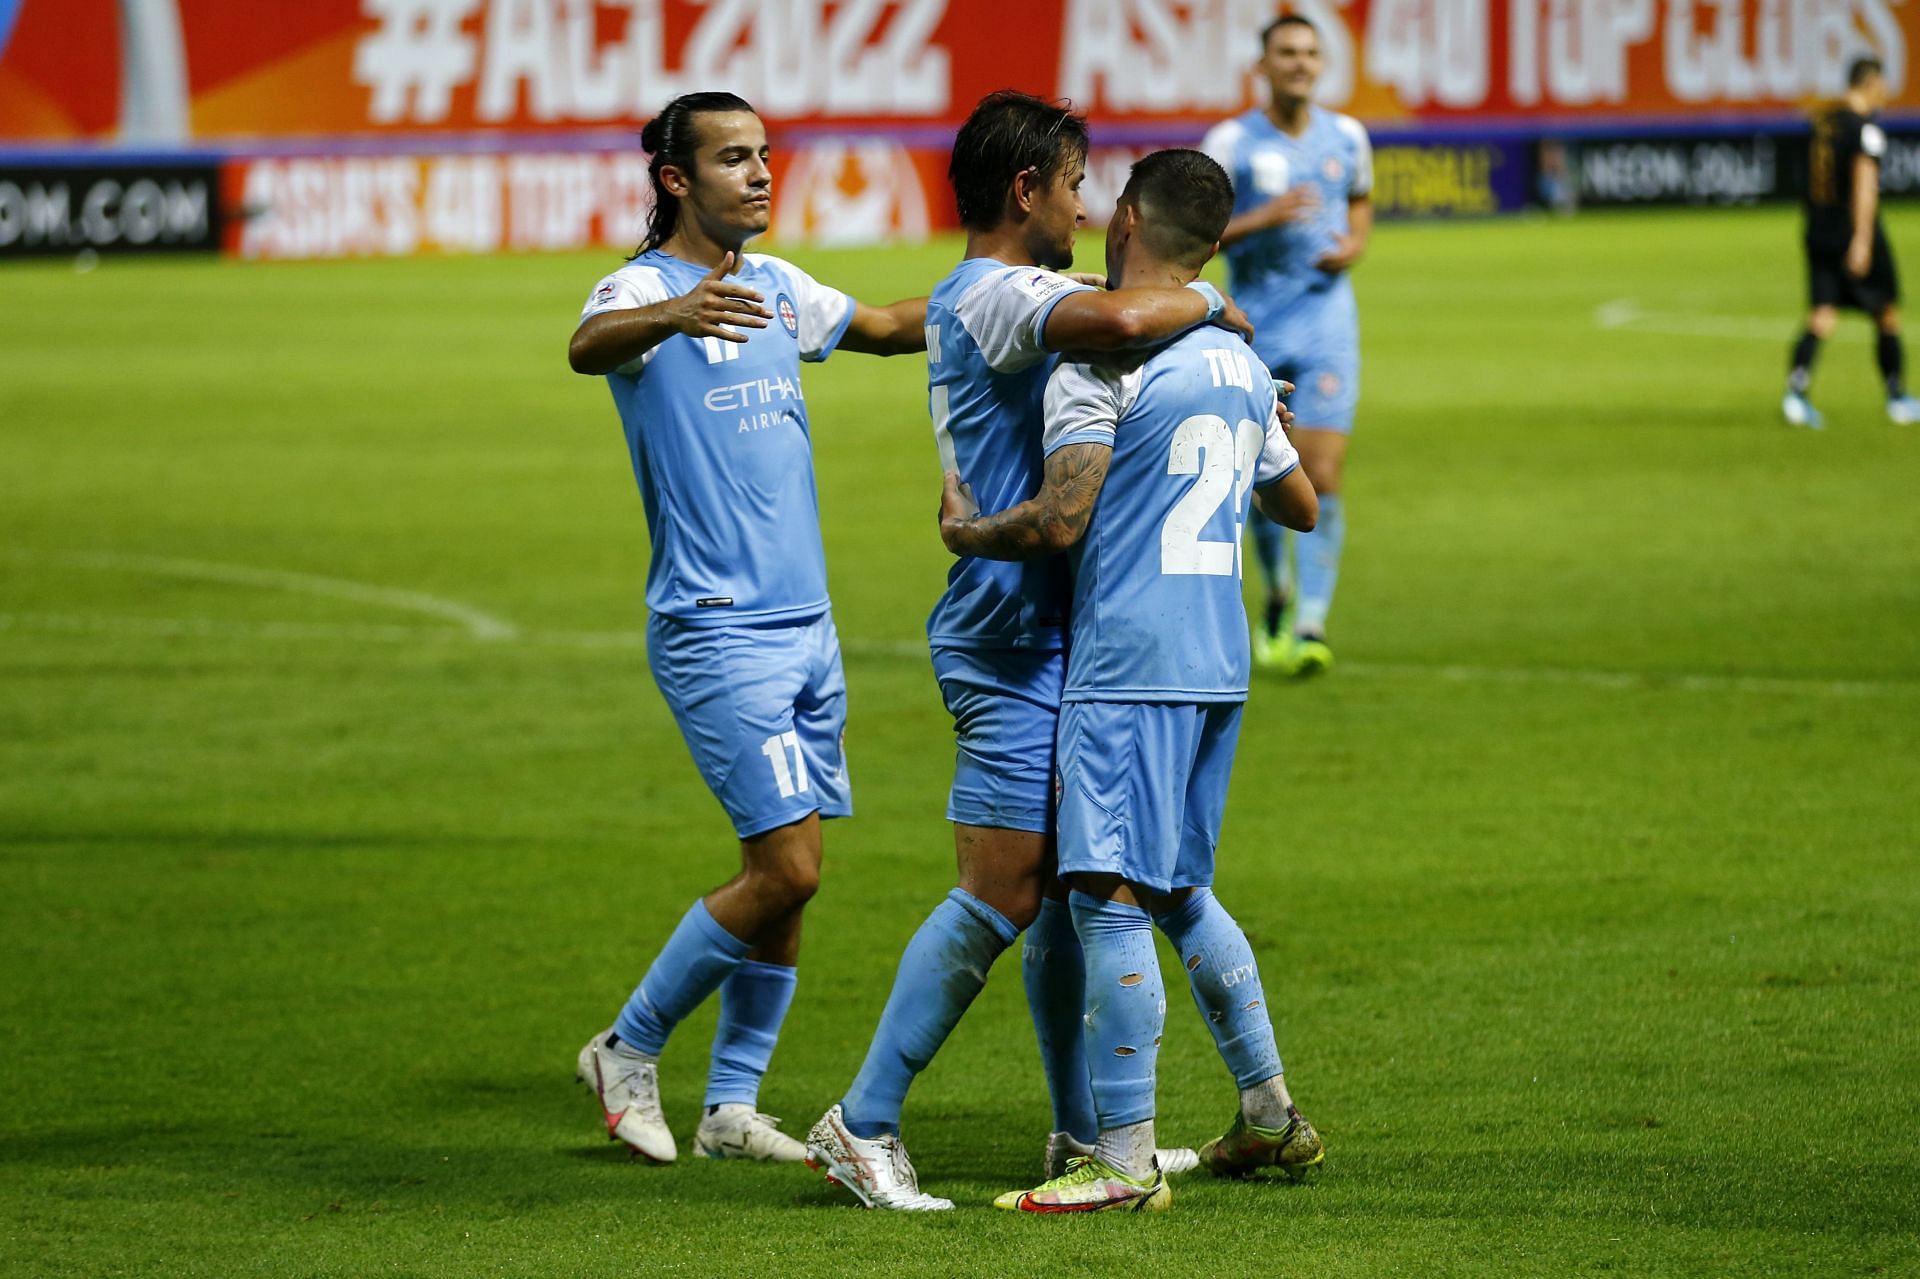 Melbourne City will face group leaders Pathum United in the AFC Champions League.